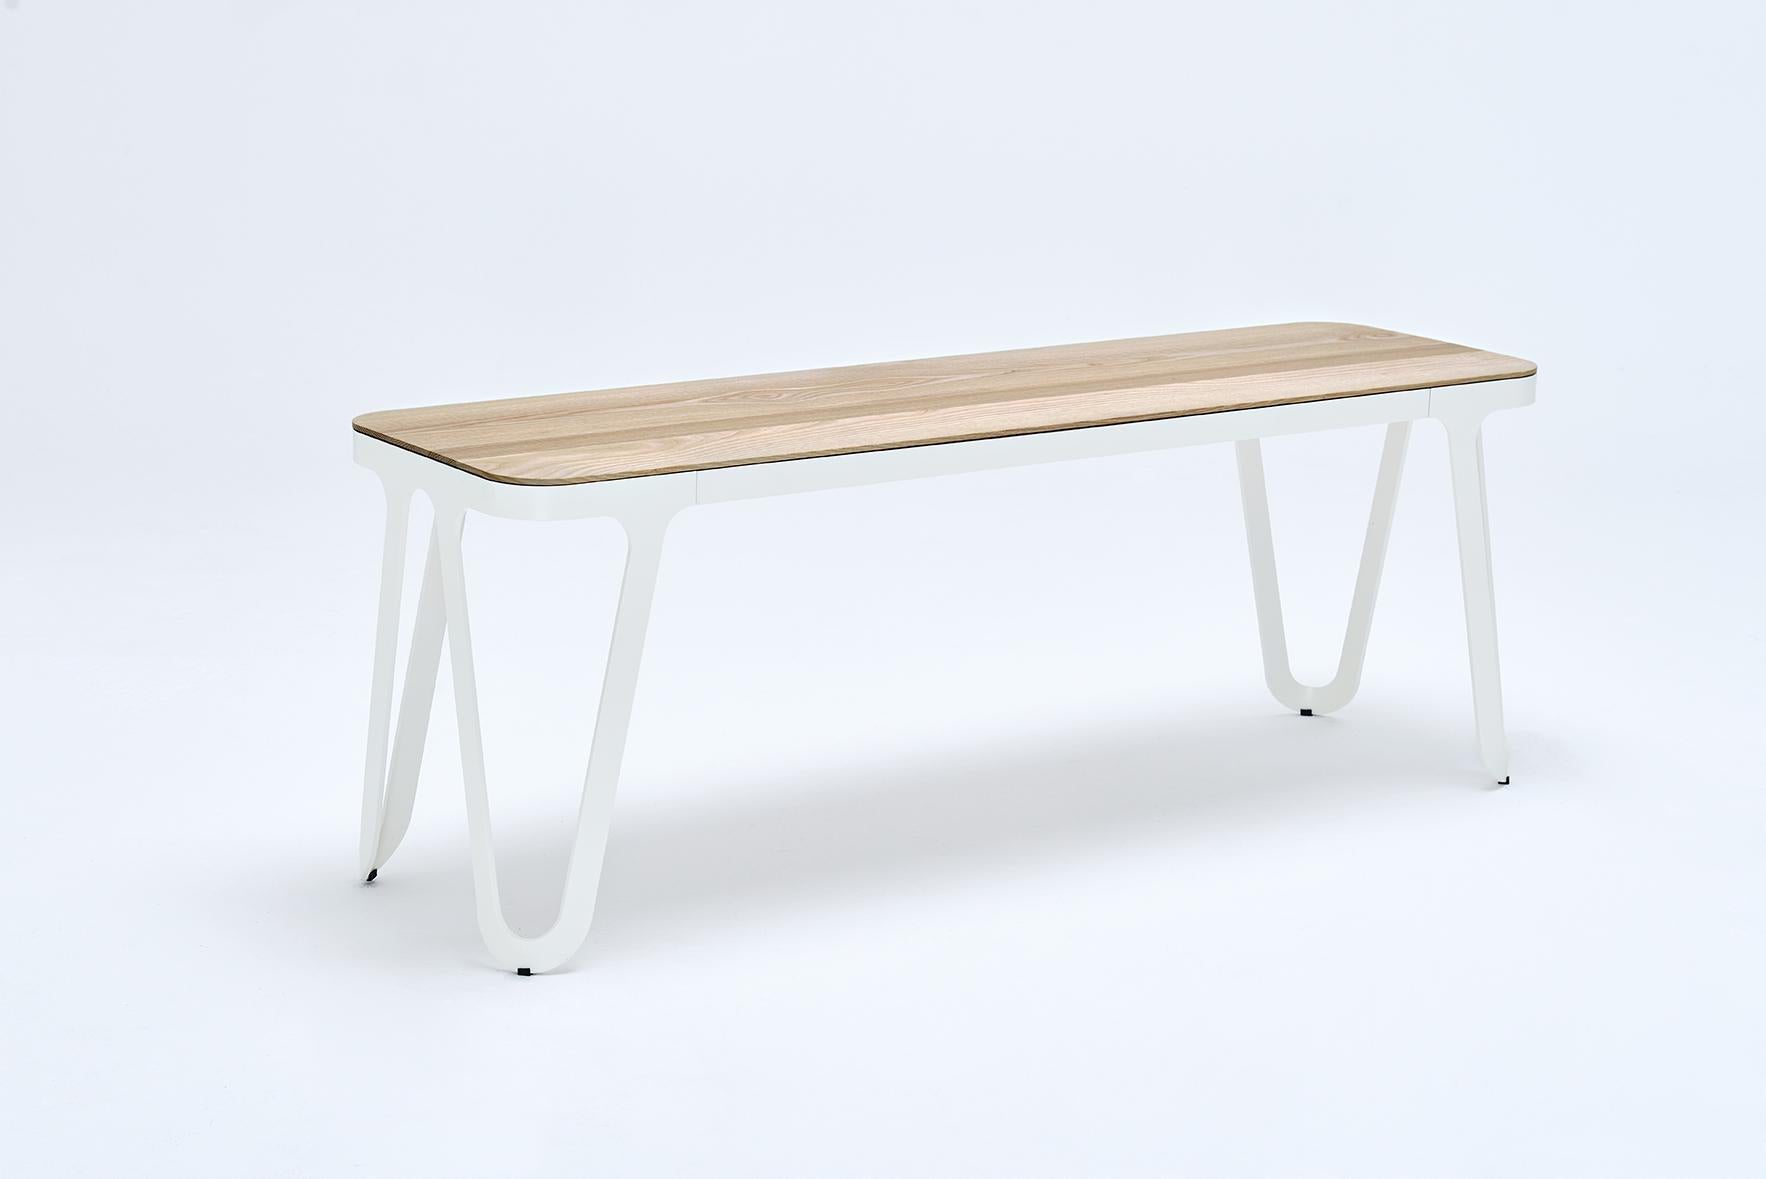 Loop bench 120 ash by Sebastian Scherer
Material: aluminium, ash
Dimensions: D 120x W 38 x H 45 cm.
Also available: colors: solid wood (matt lacquered): black and white stained ash / natural oak / american walnut
frame (matt): snow white / light